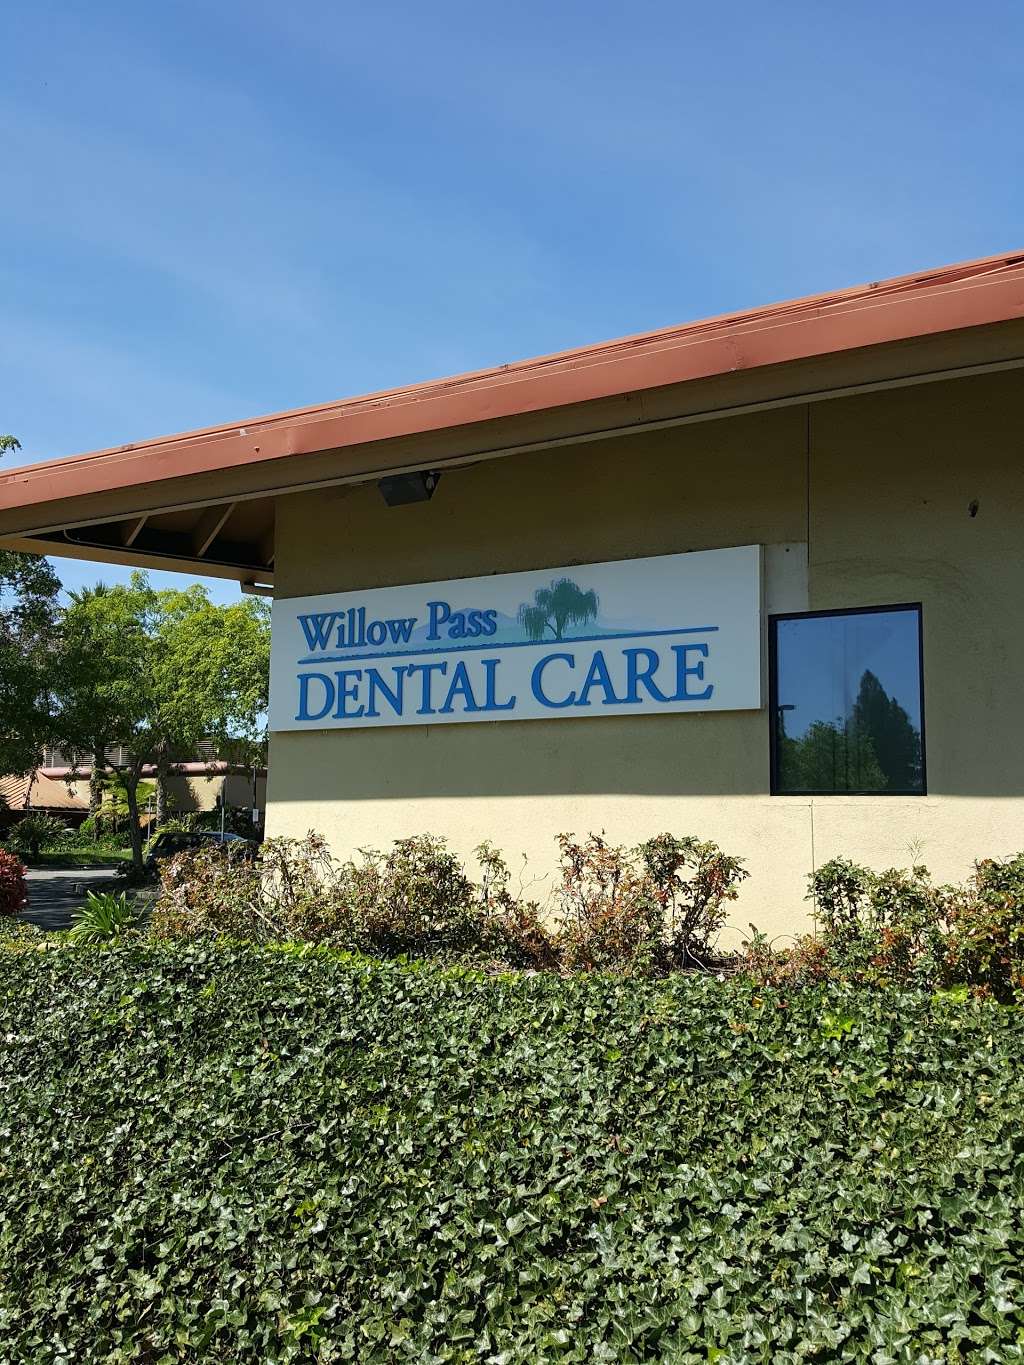 Willow Pass Dental Care | 1255 Willow Pass Rd, Concord, CA 94520 | Phone: (925) 326-6141